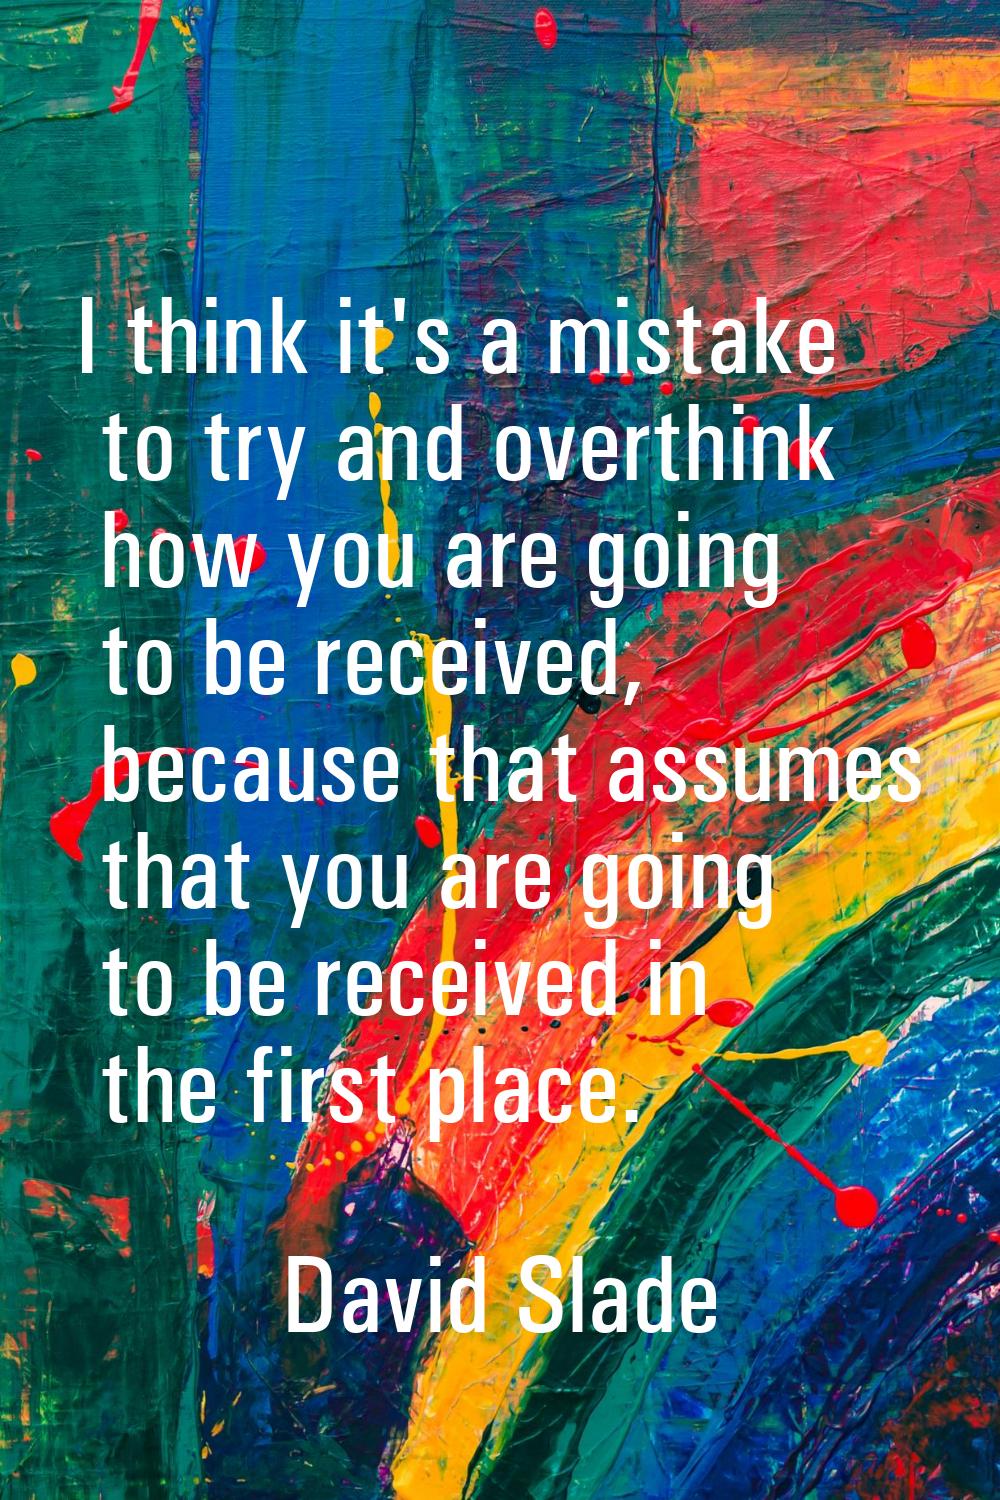 I think it's a mistake to try and overthink how you are going to be received, because that assumes 